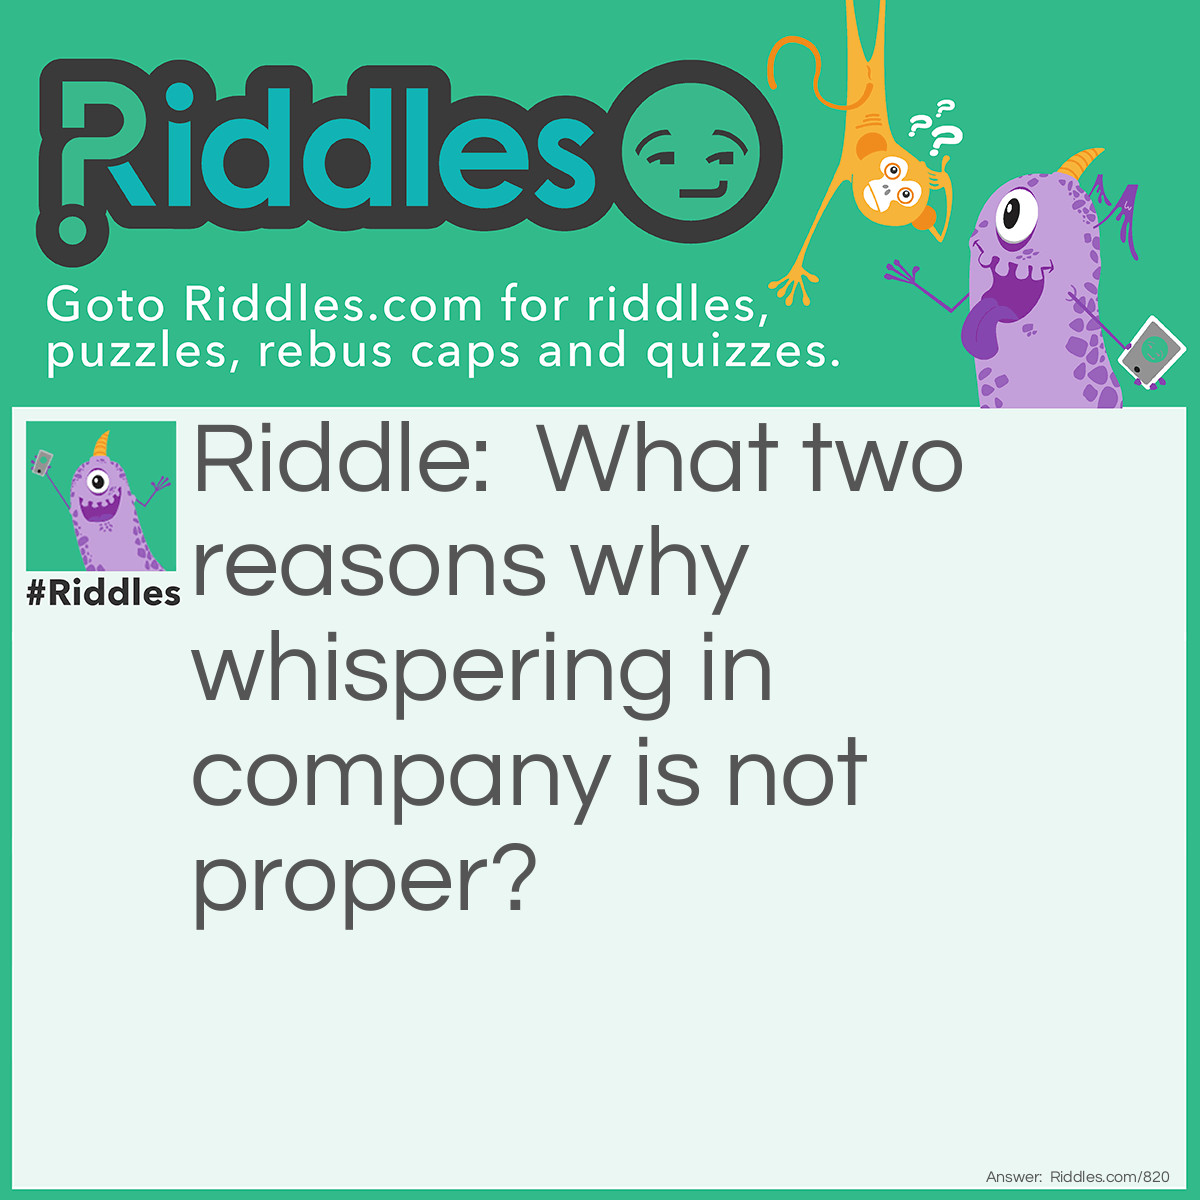 Riddle: What two reasons why whispering in company is not proper? Answer: It is not aloud (allowed). 
<div class="poemq">
<div class="stanza">
Private earing (privateering) is unlawful.
</div>
</div>